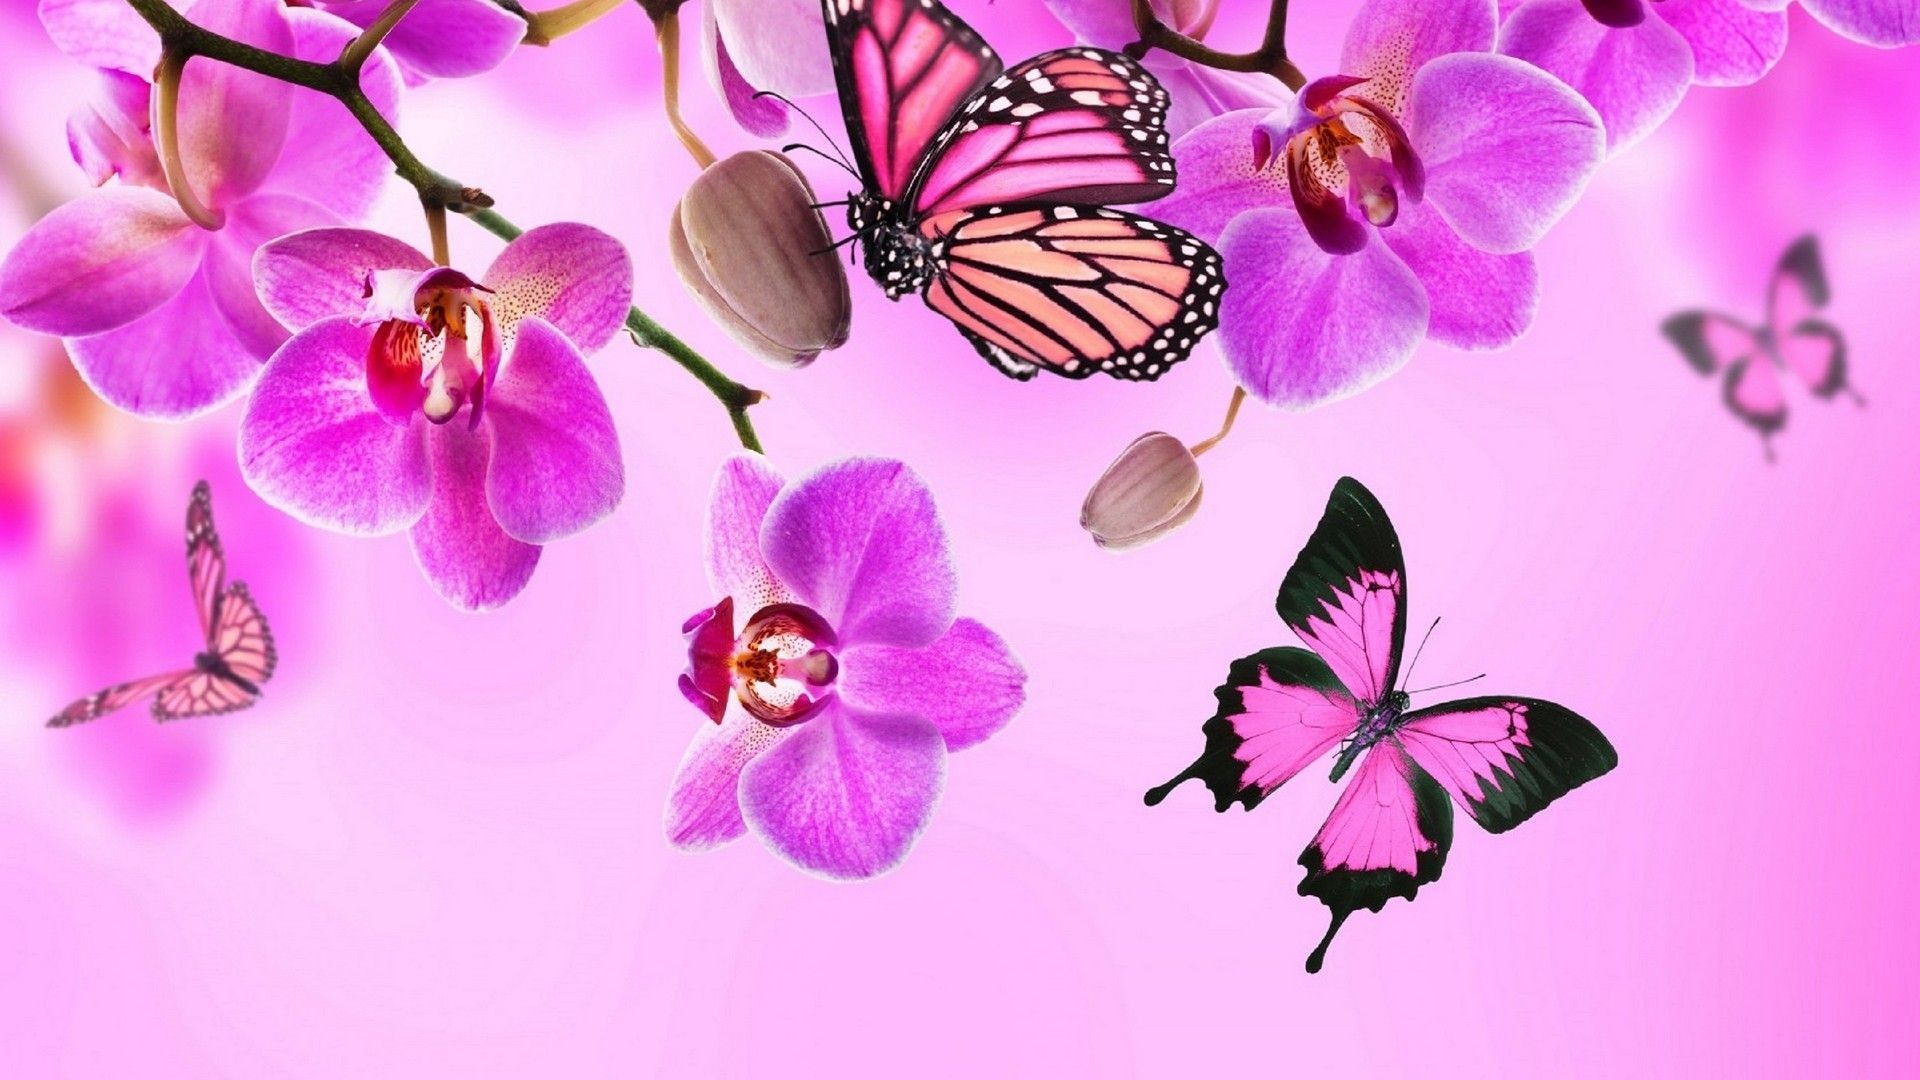 1920x1080 Pink Butterfly Wallpaper For Desktop is best high definition wallpaper  image 2018. You can use this wallpaper as background for your desktop  Computer ...